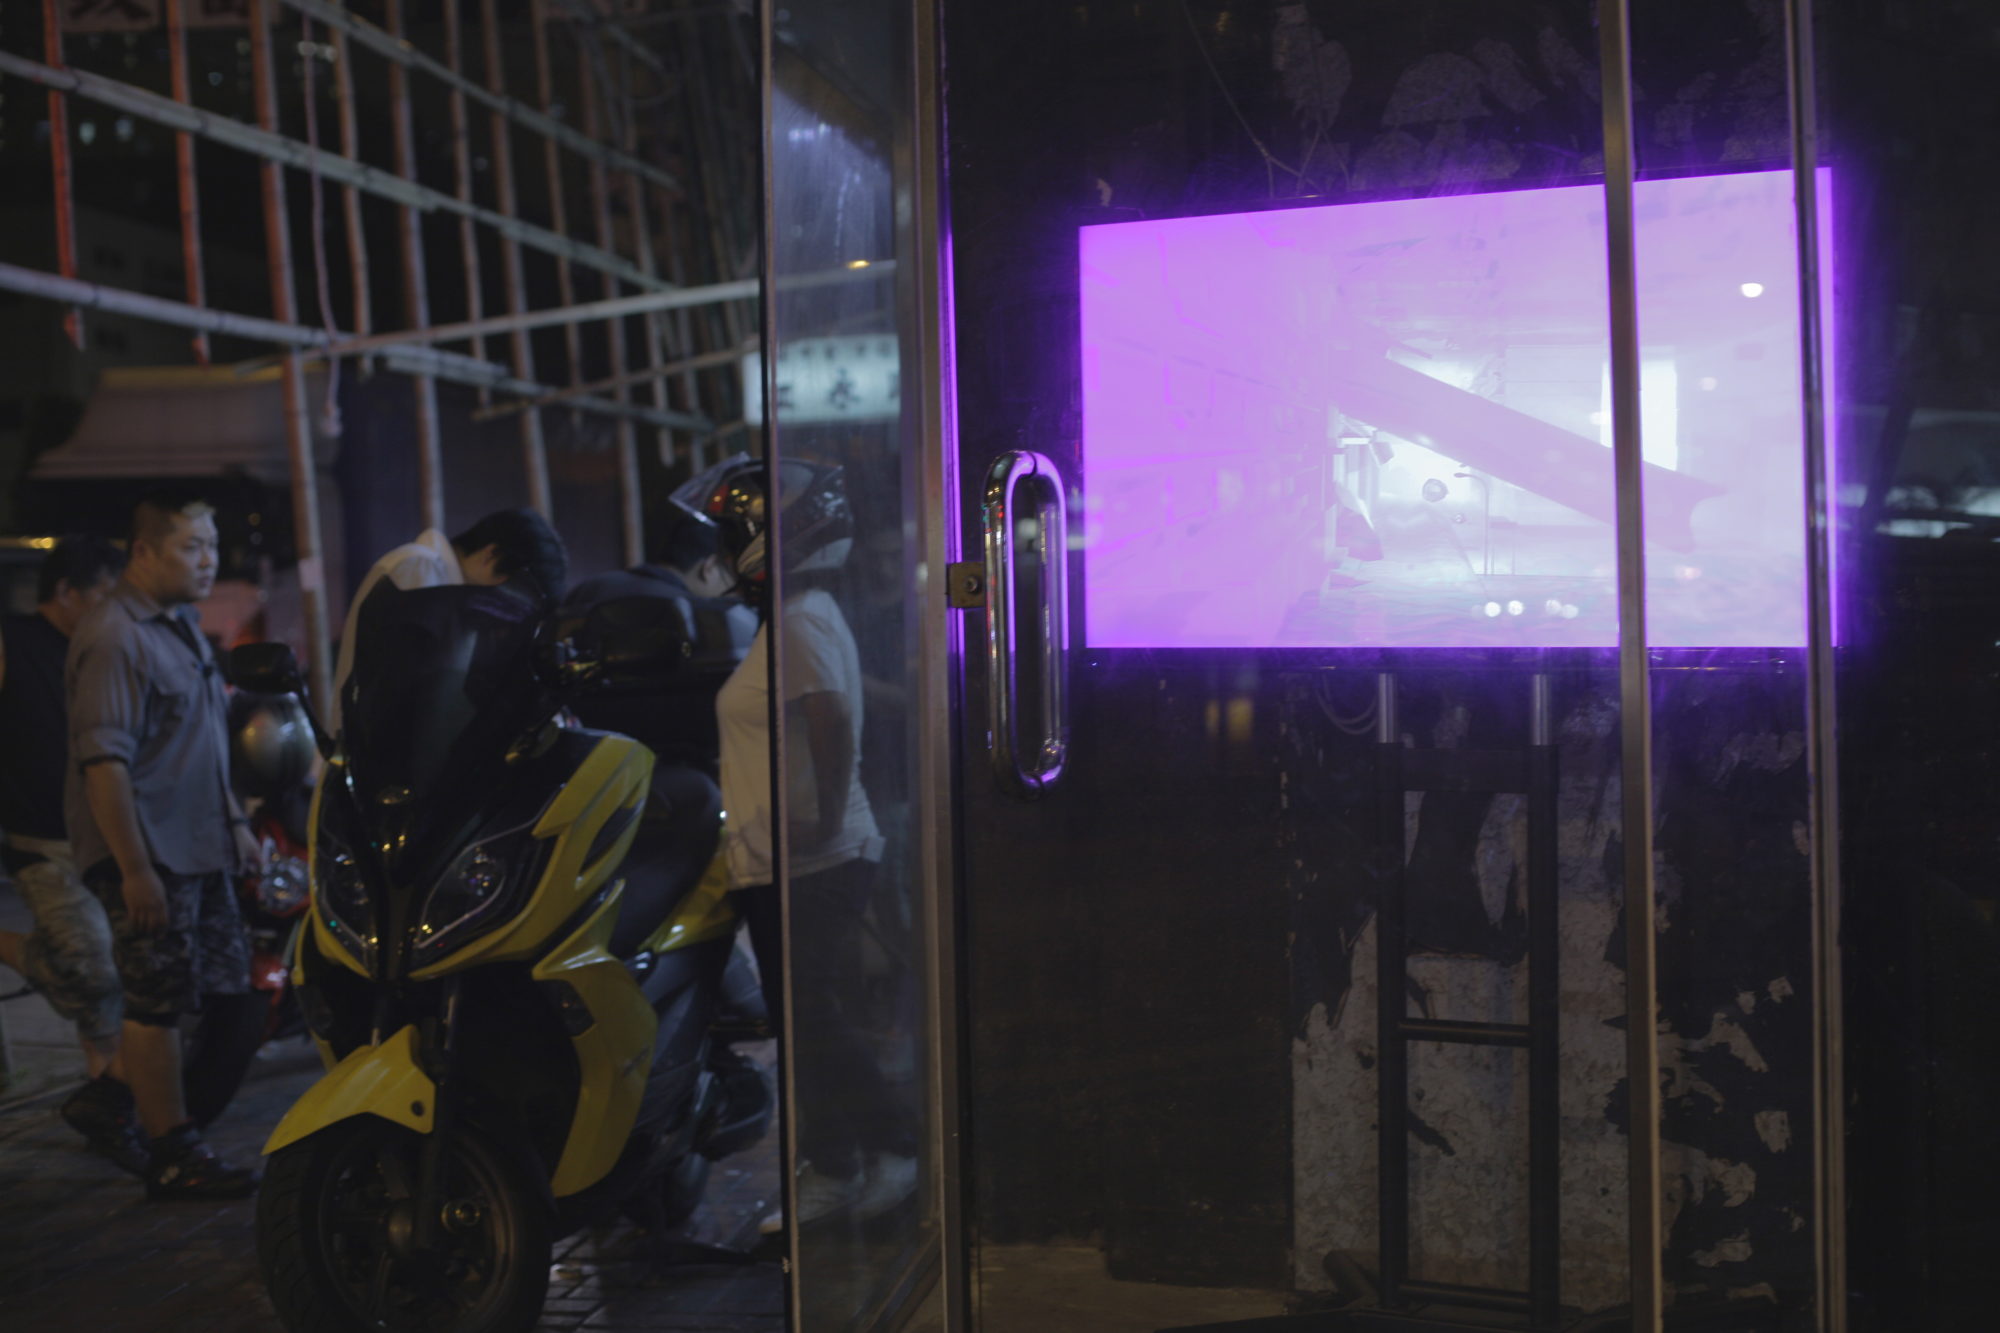 urban scene with a purple screen and a glass done next to people standing on the street next to a motorcycle